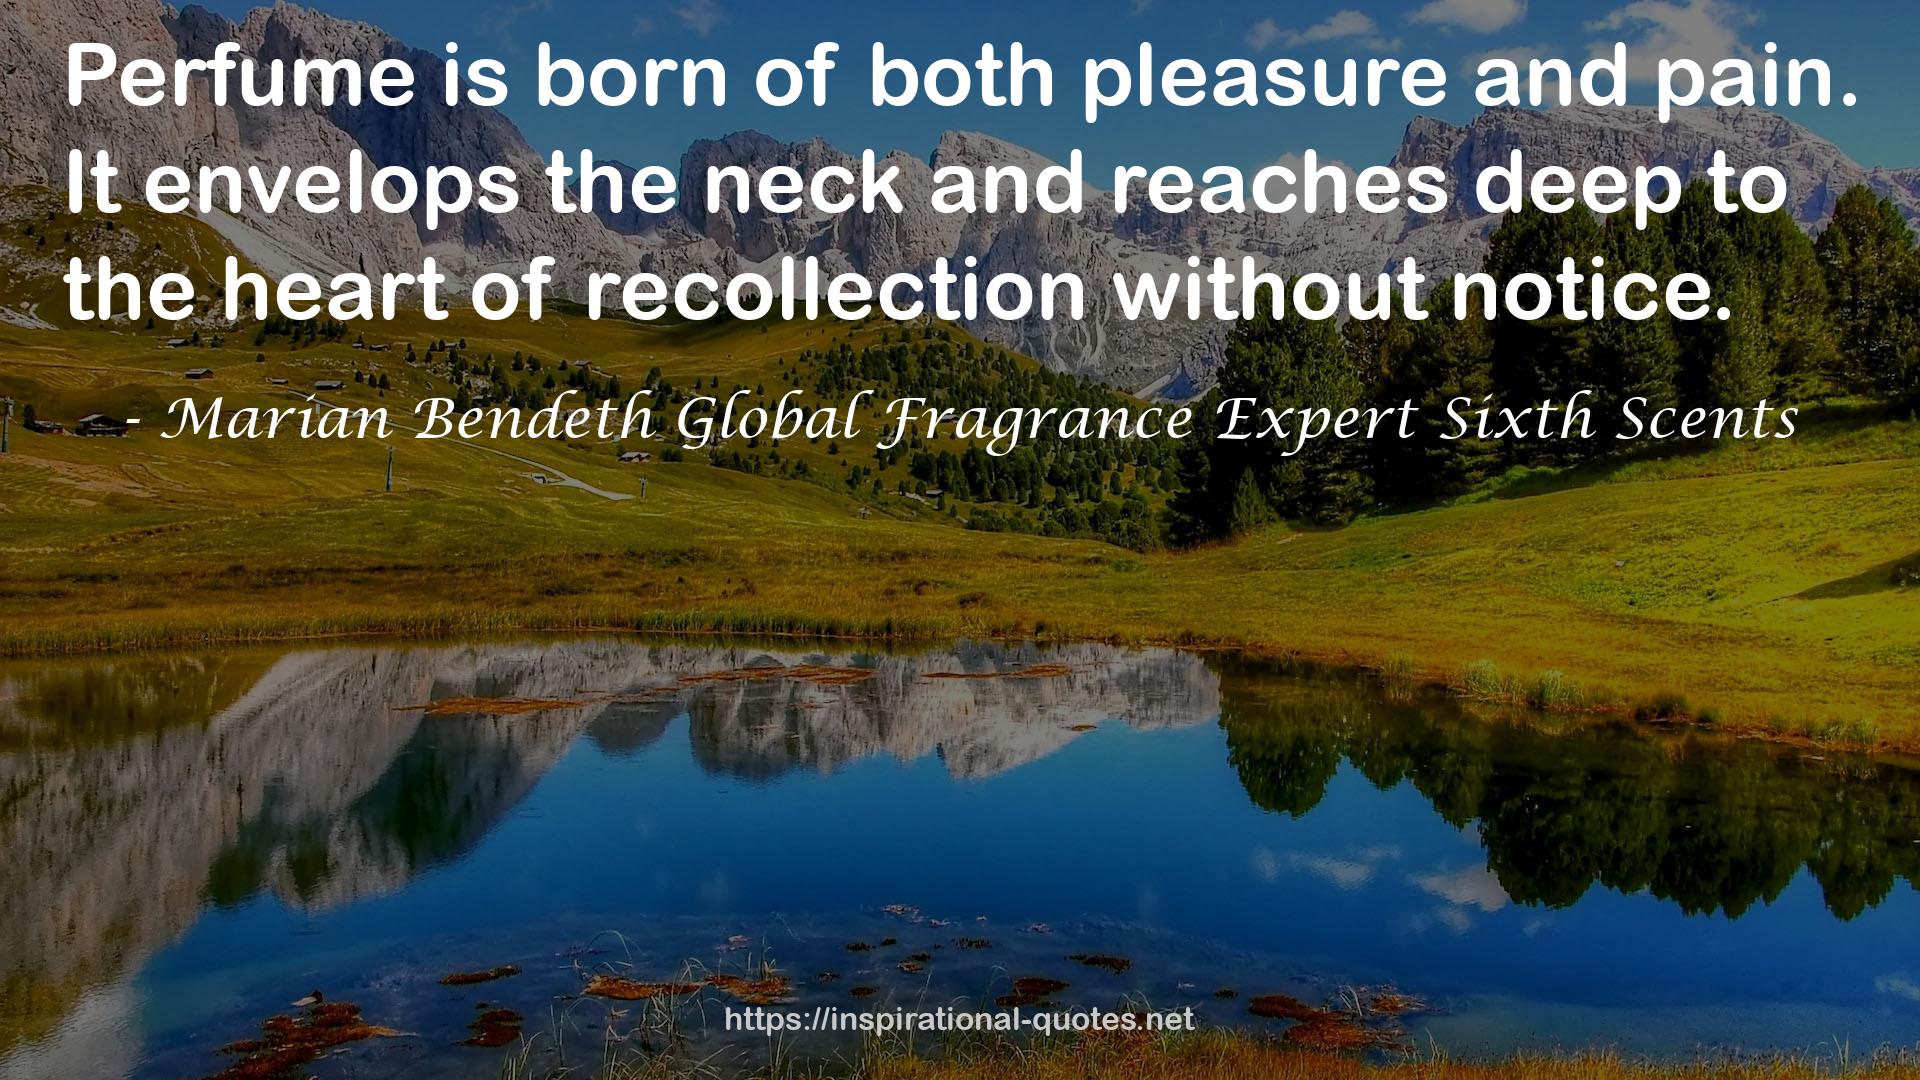 Marian Bendeth Global Fragrance Expert Sixth Scents QUOTES